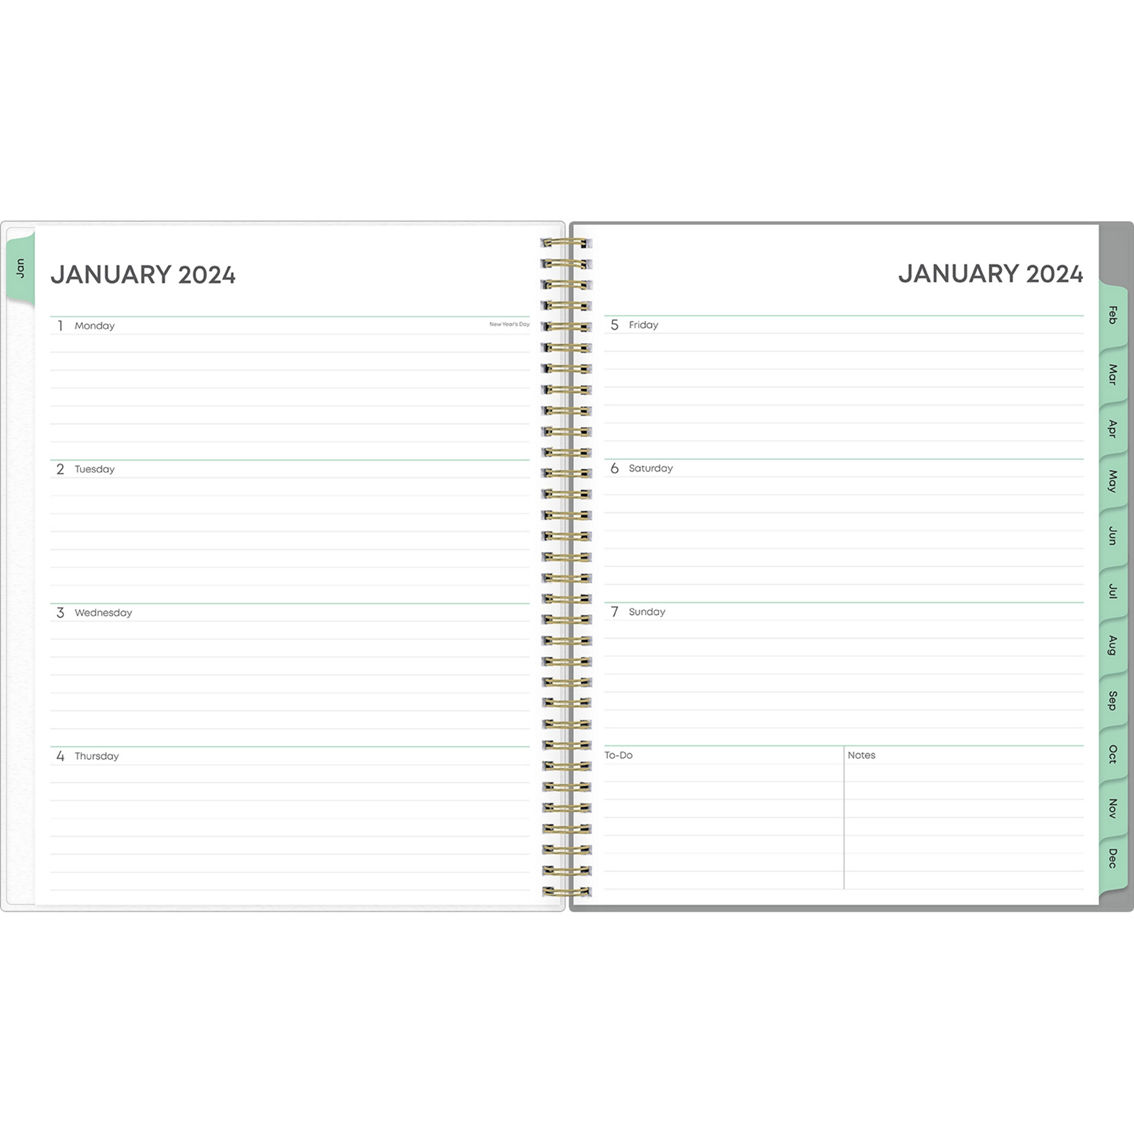 Bluesky 2024 Sophie Frosted 8.5 in. x 11 in. Planning Calendar - Image 2 of 8